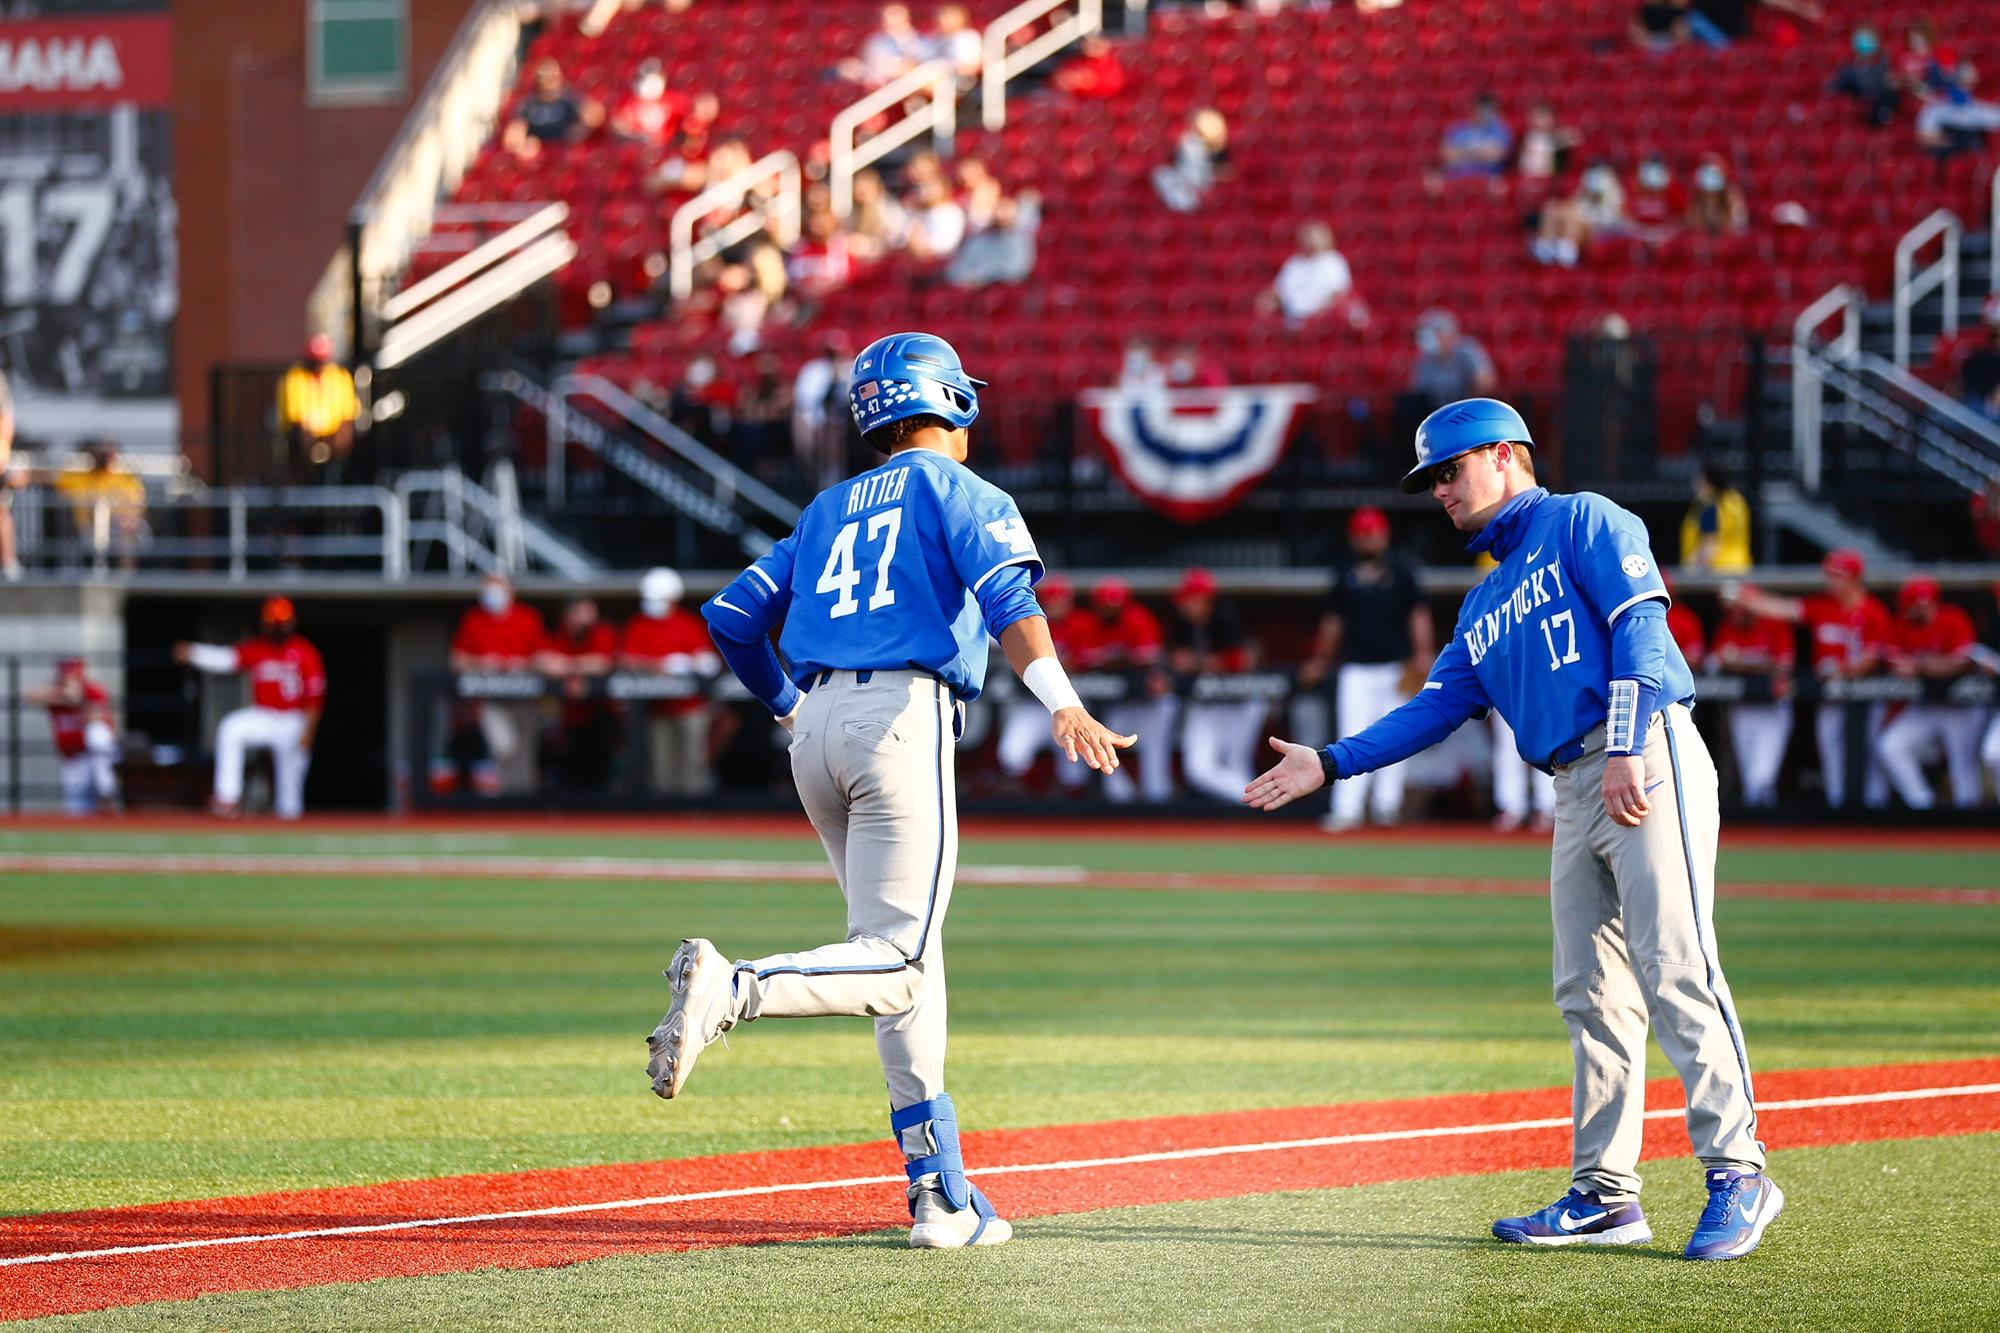 Ritter Me This: Kentucky Takes Down No. 5 Louisville